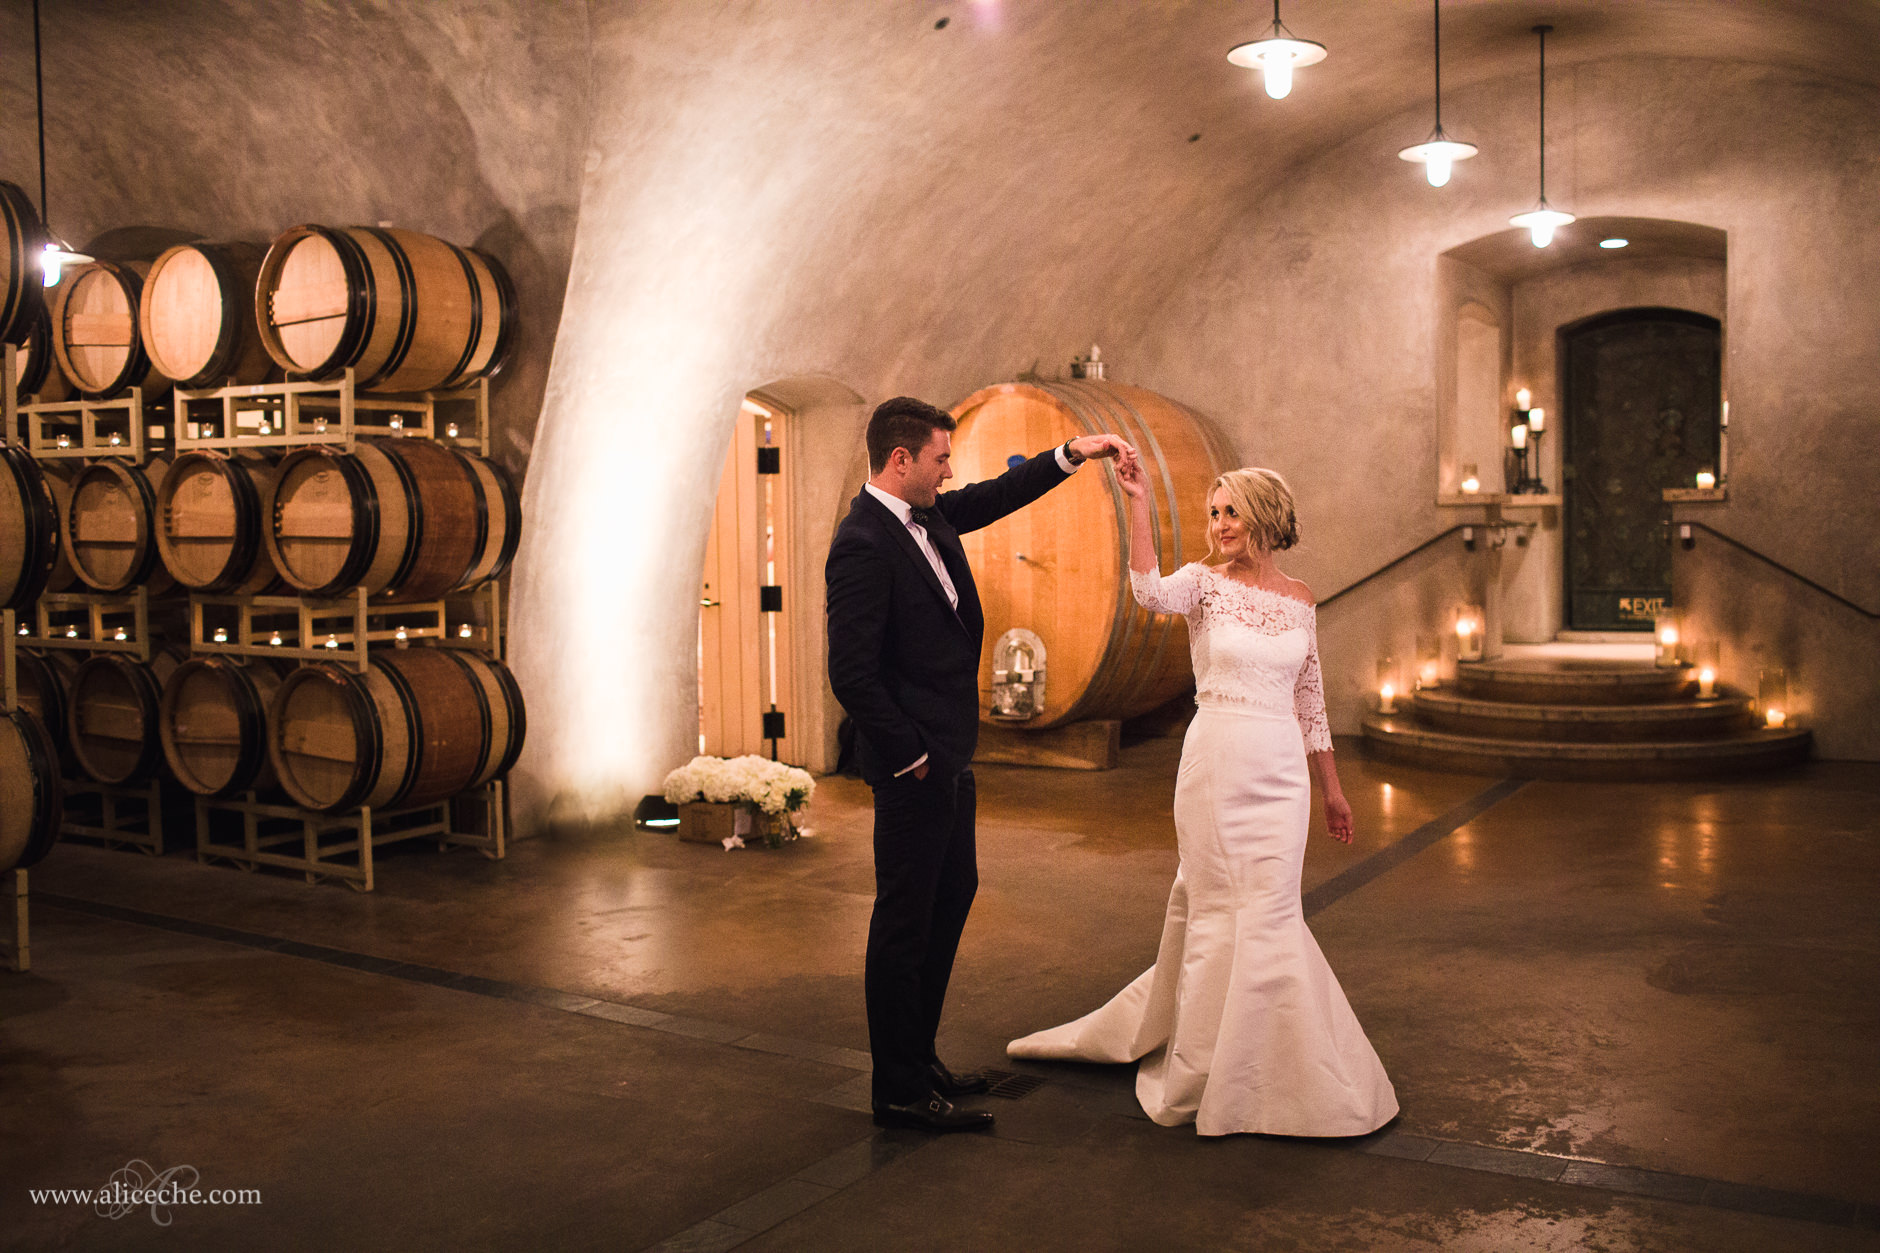 Viansa Winery Sonoma Wedding Bride and Groom Dancing in Wine Cellar Lit with Candles